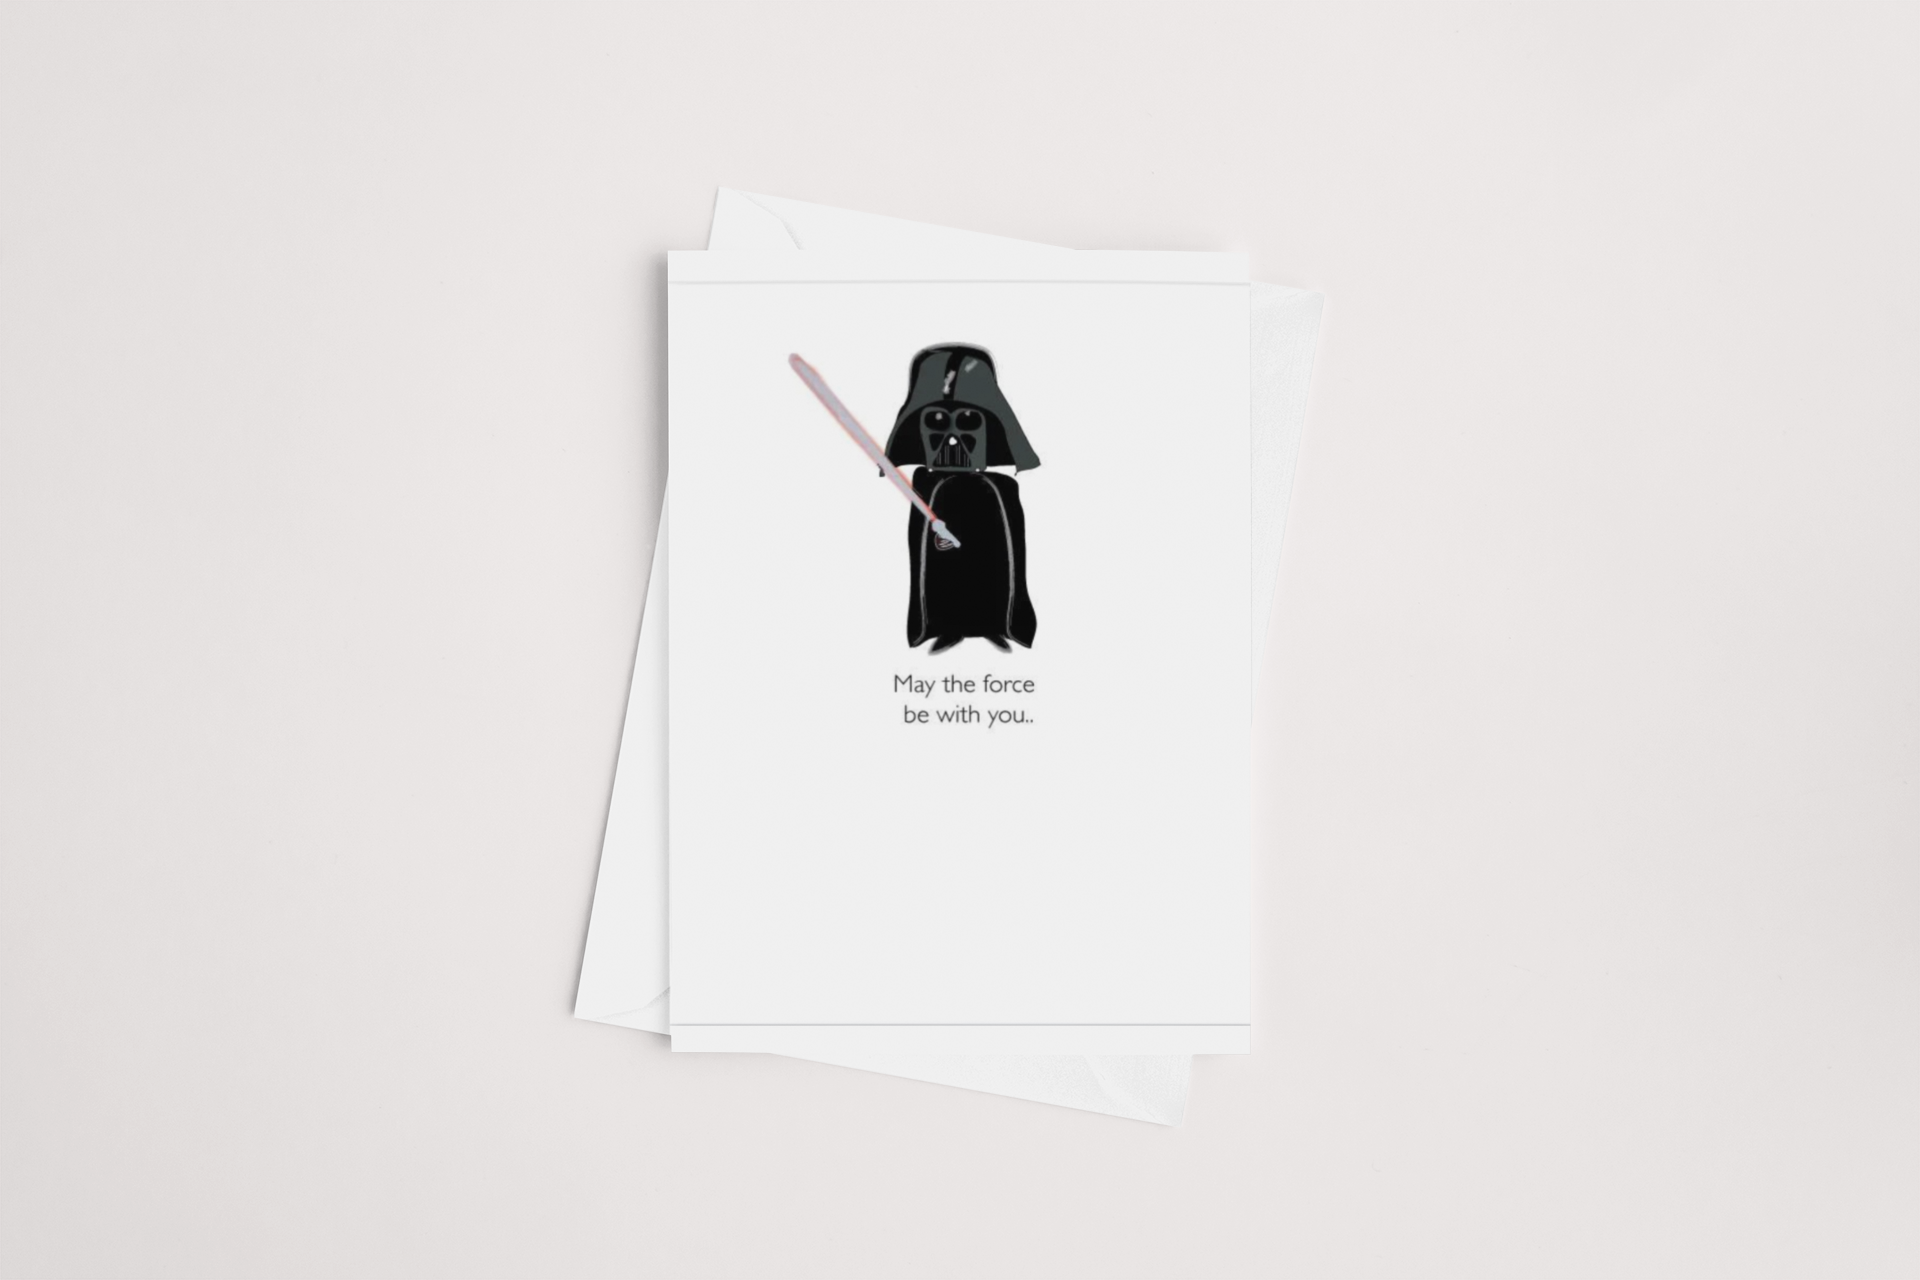 A May the Force be With You Card, product of New Zealand, featuring an illustration of Darth Vader with a lightsaber and the caption "May the force be with you." from icandy.